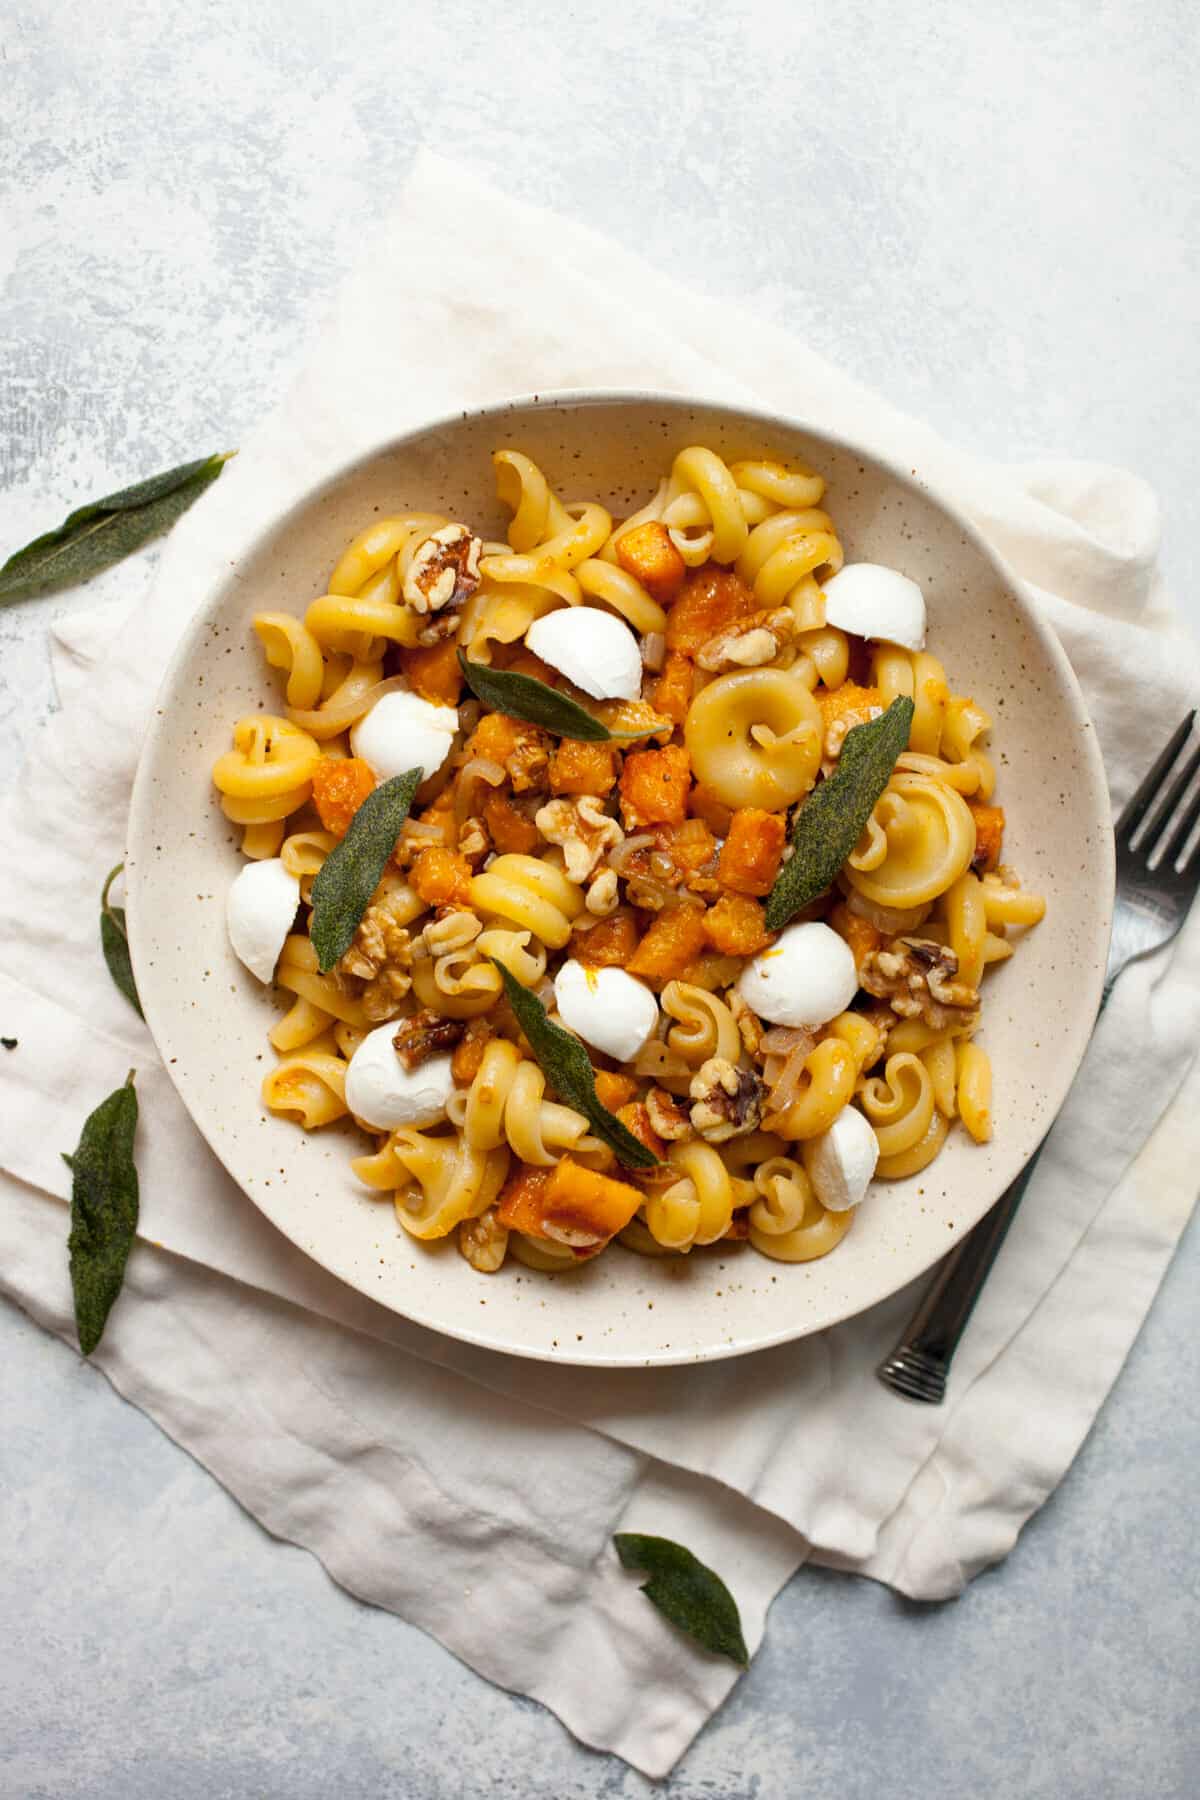 Butternut Squash Pasta Toss: Caramelized butternut squash with crispy sage, shallot, garlic, and a touch of cheese is the perfect fall pasta dish. Quick to make and delicious flavors! | macheesmo.com